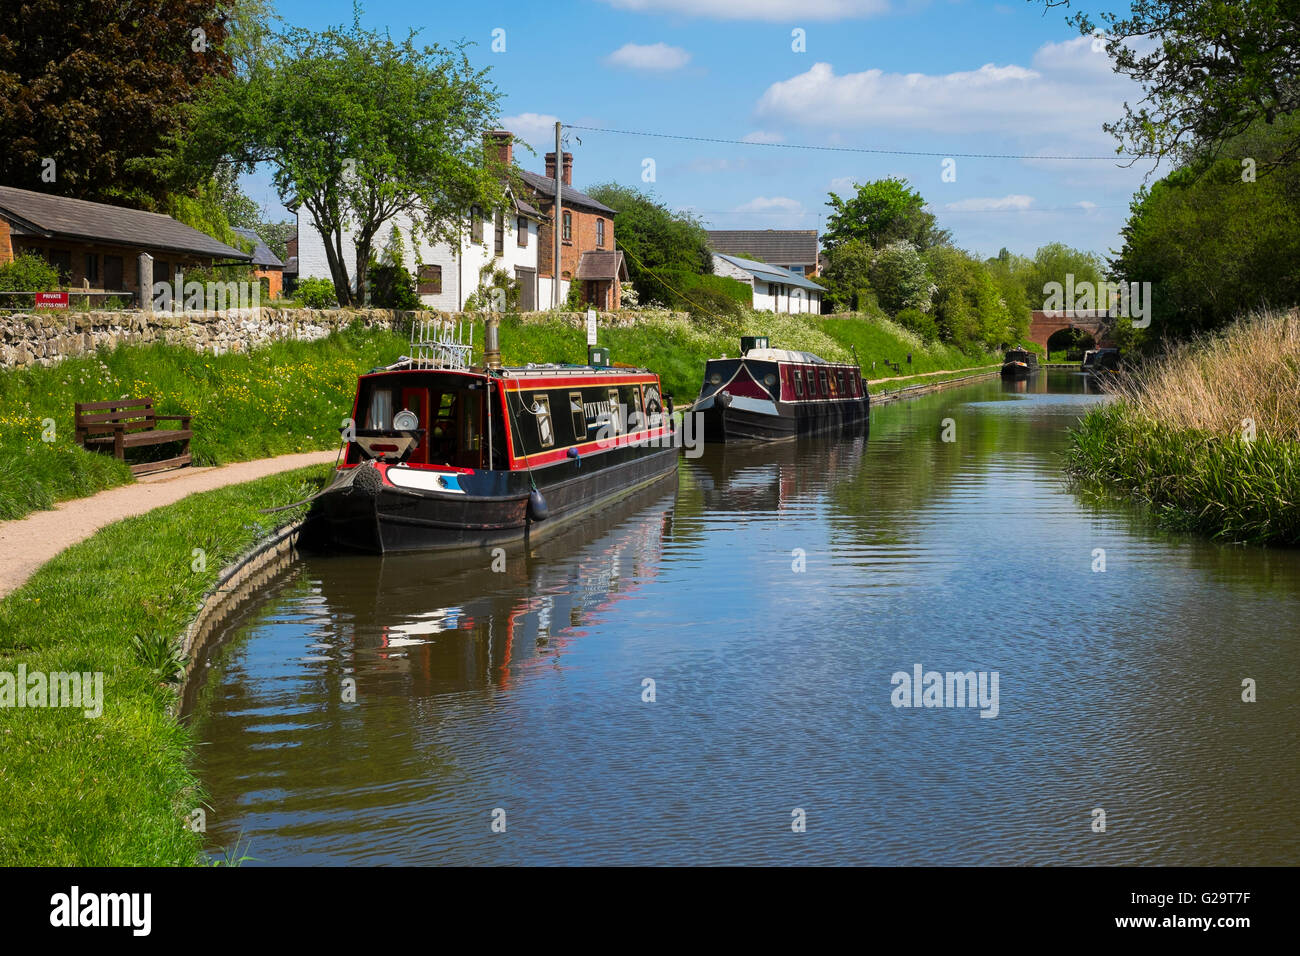 Canal boats moored on the Whitchurch arm of the Llangollen Canal, Shropshire, England, UK Stock Photo